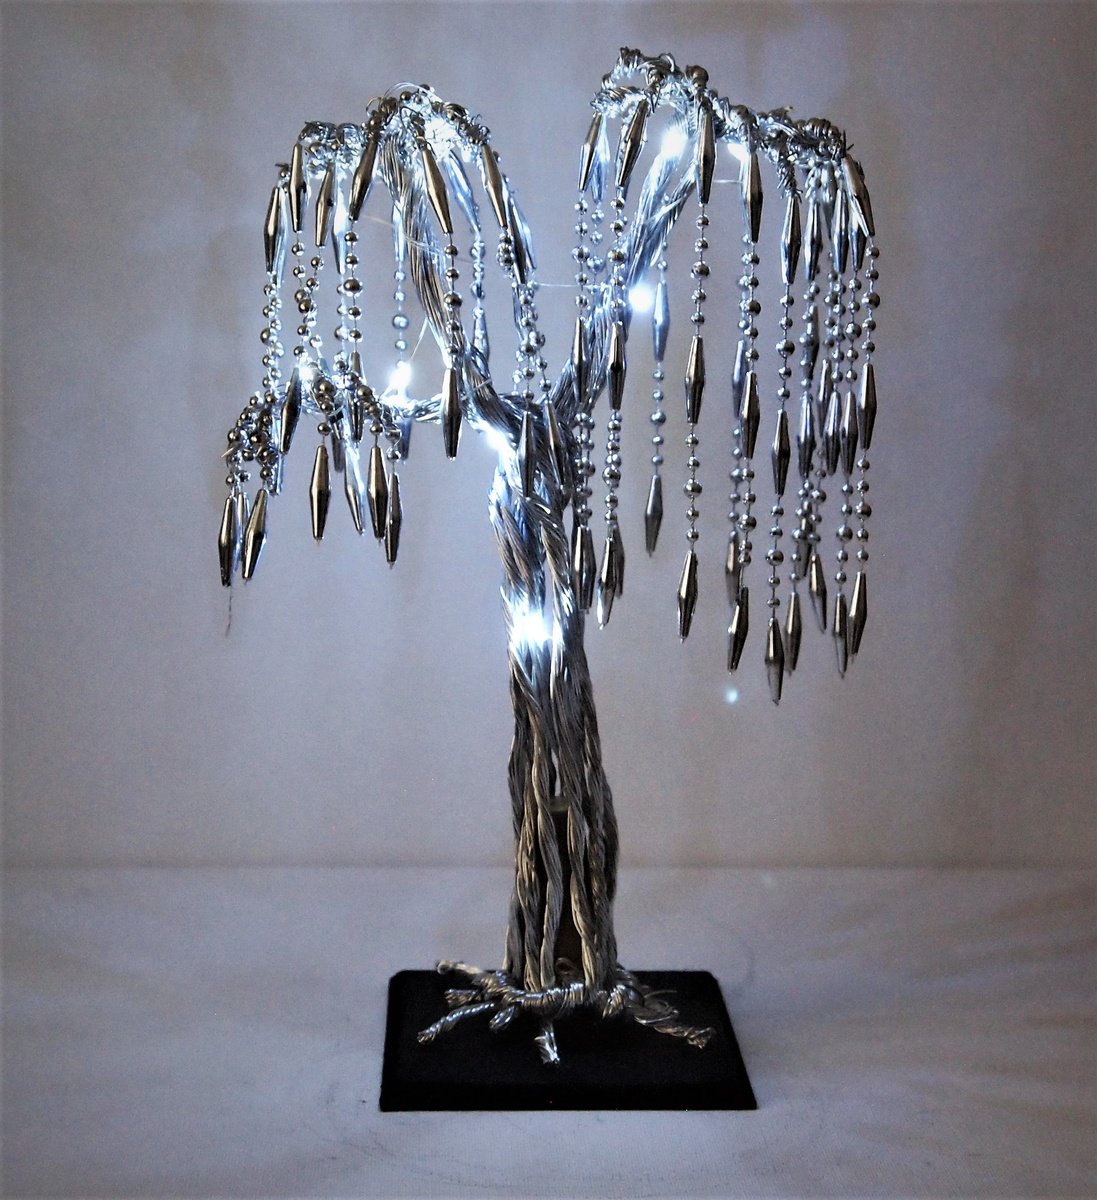 Silver wire willow tree sculpture with Beads and Bright whiteLED lights by Steph Morgan